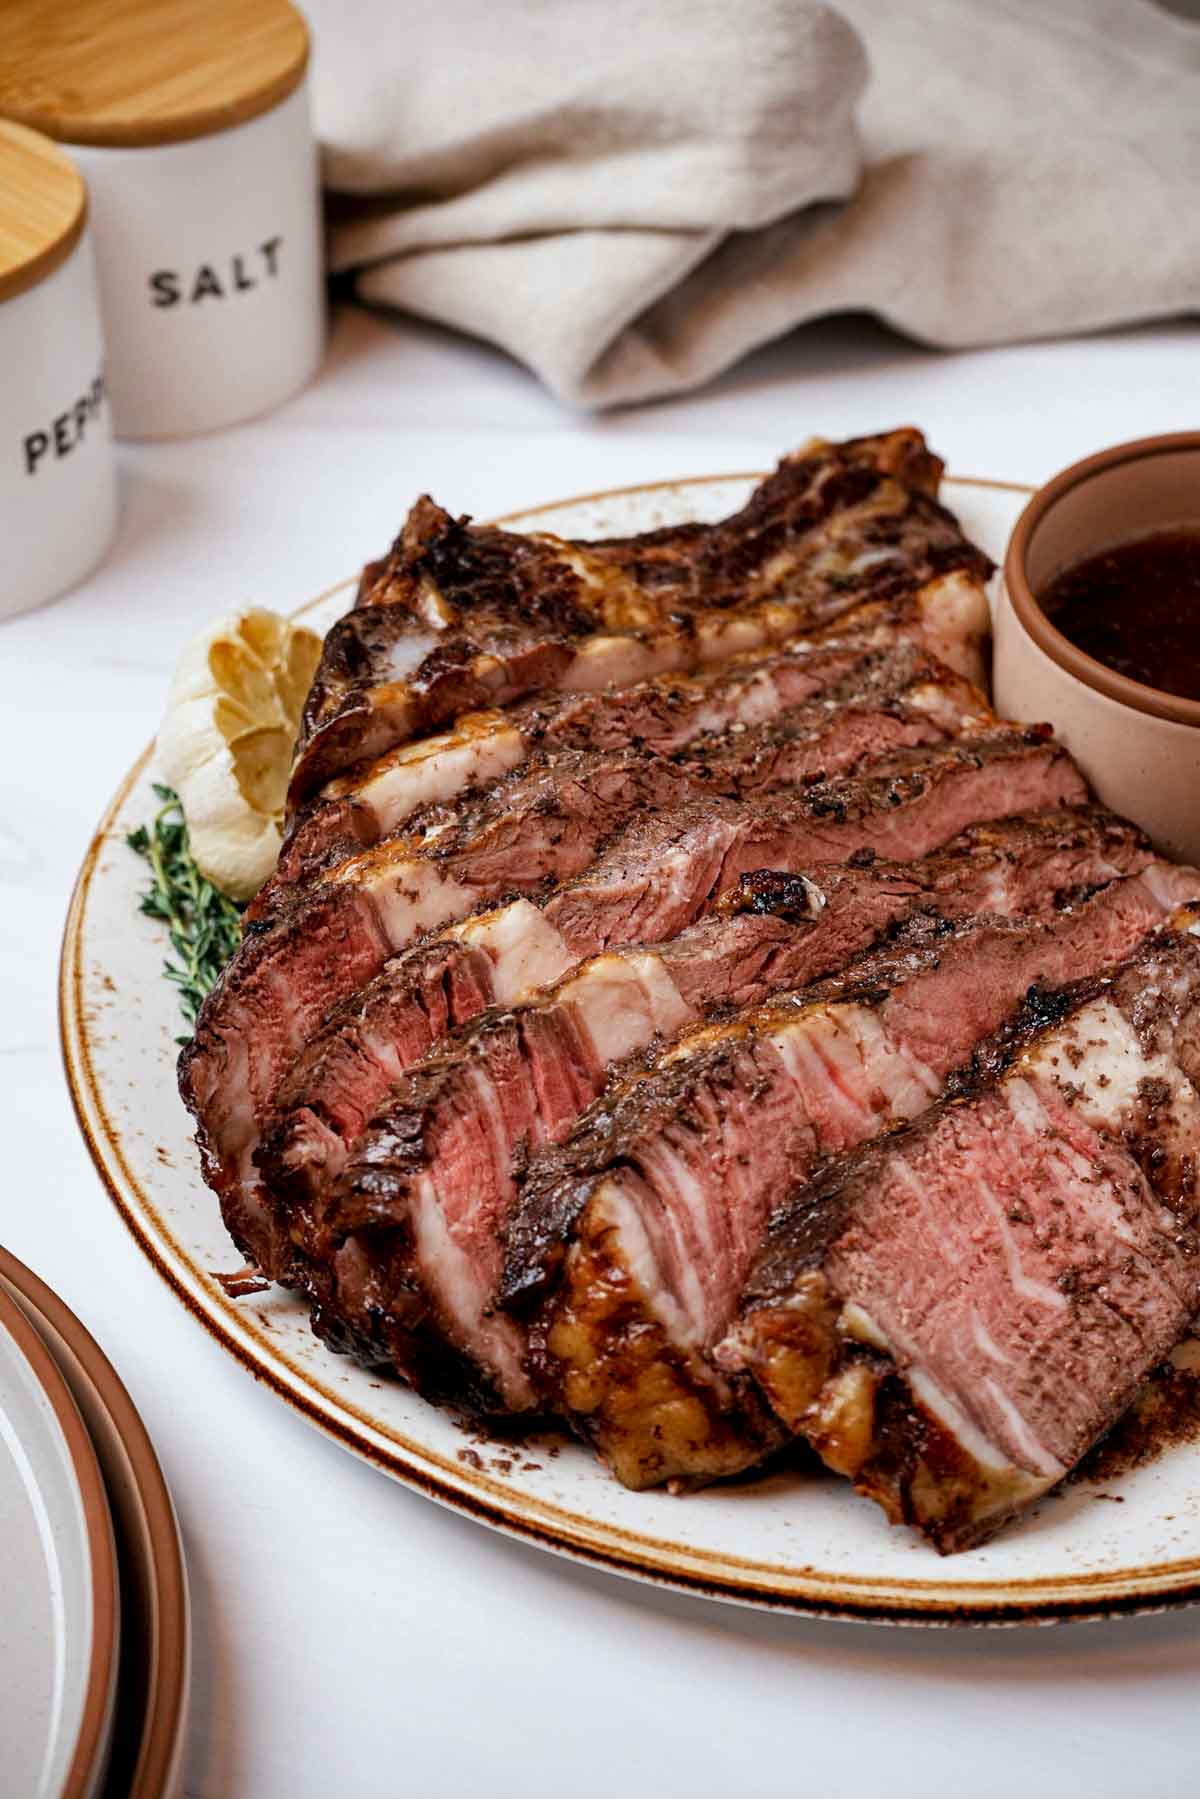 sliced prime rib on a plate with a bowl of sauce